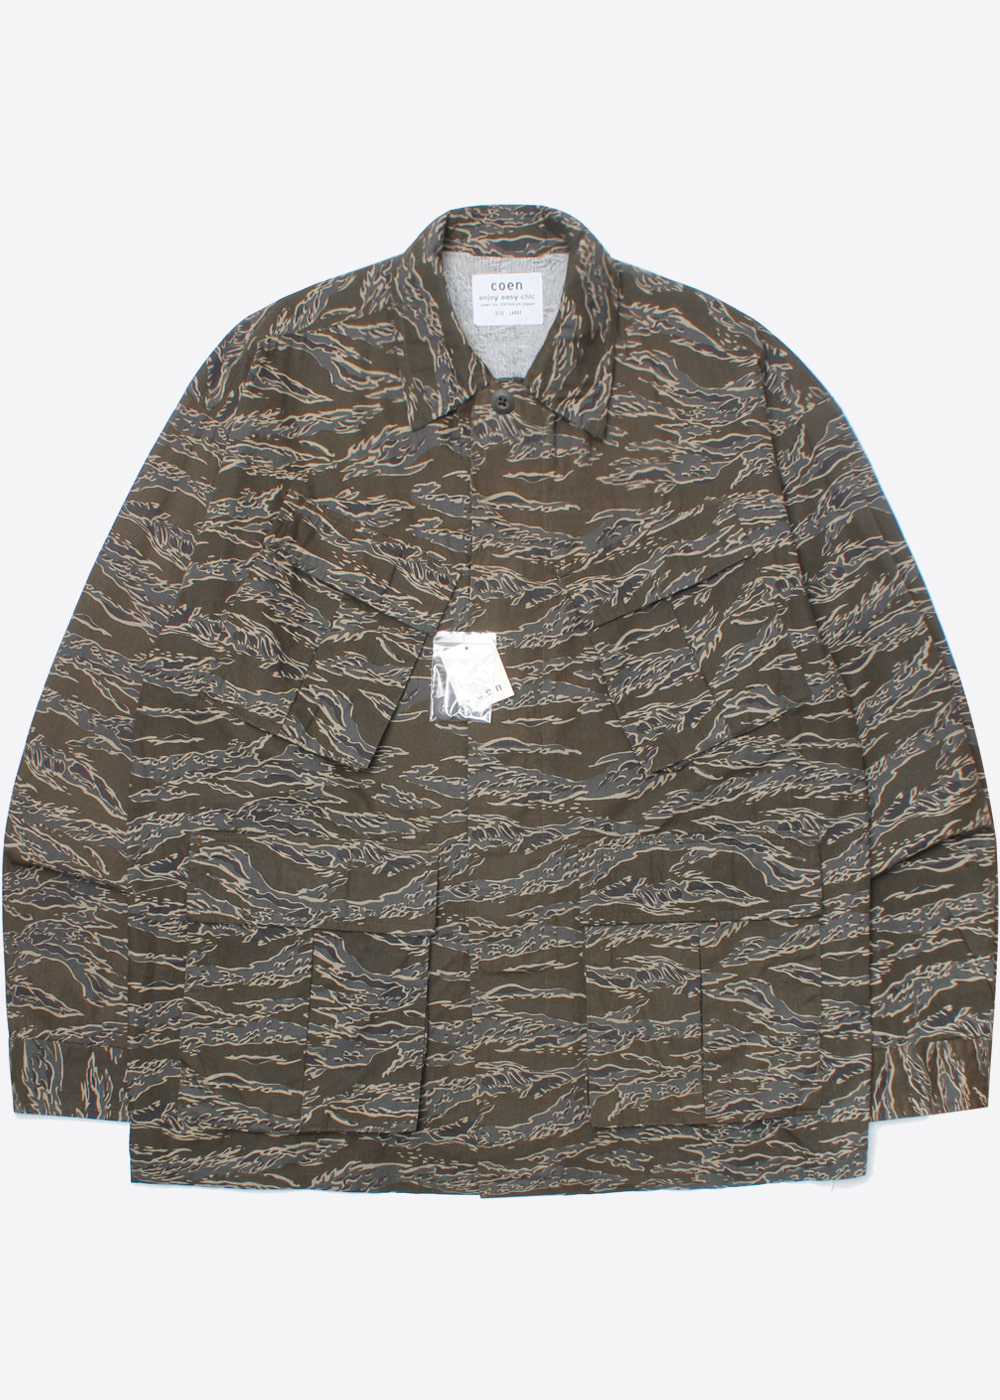 COEN BY UNITED ARROWS’over fit’camo m-65 motive filed parka